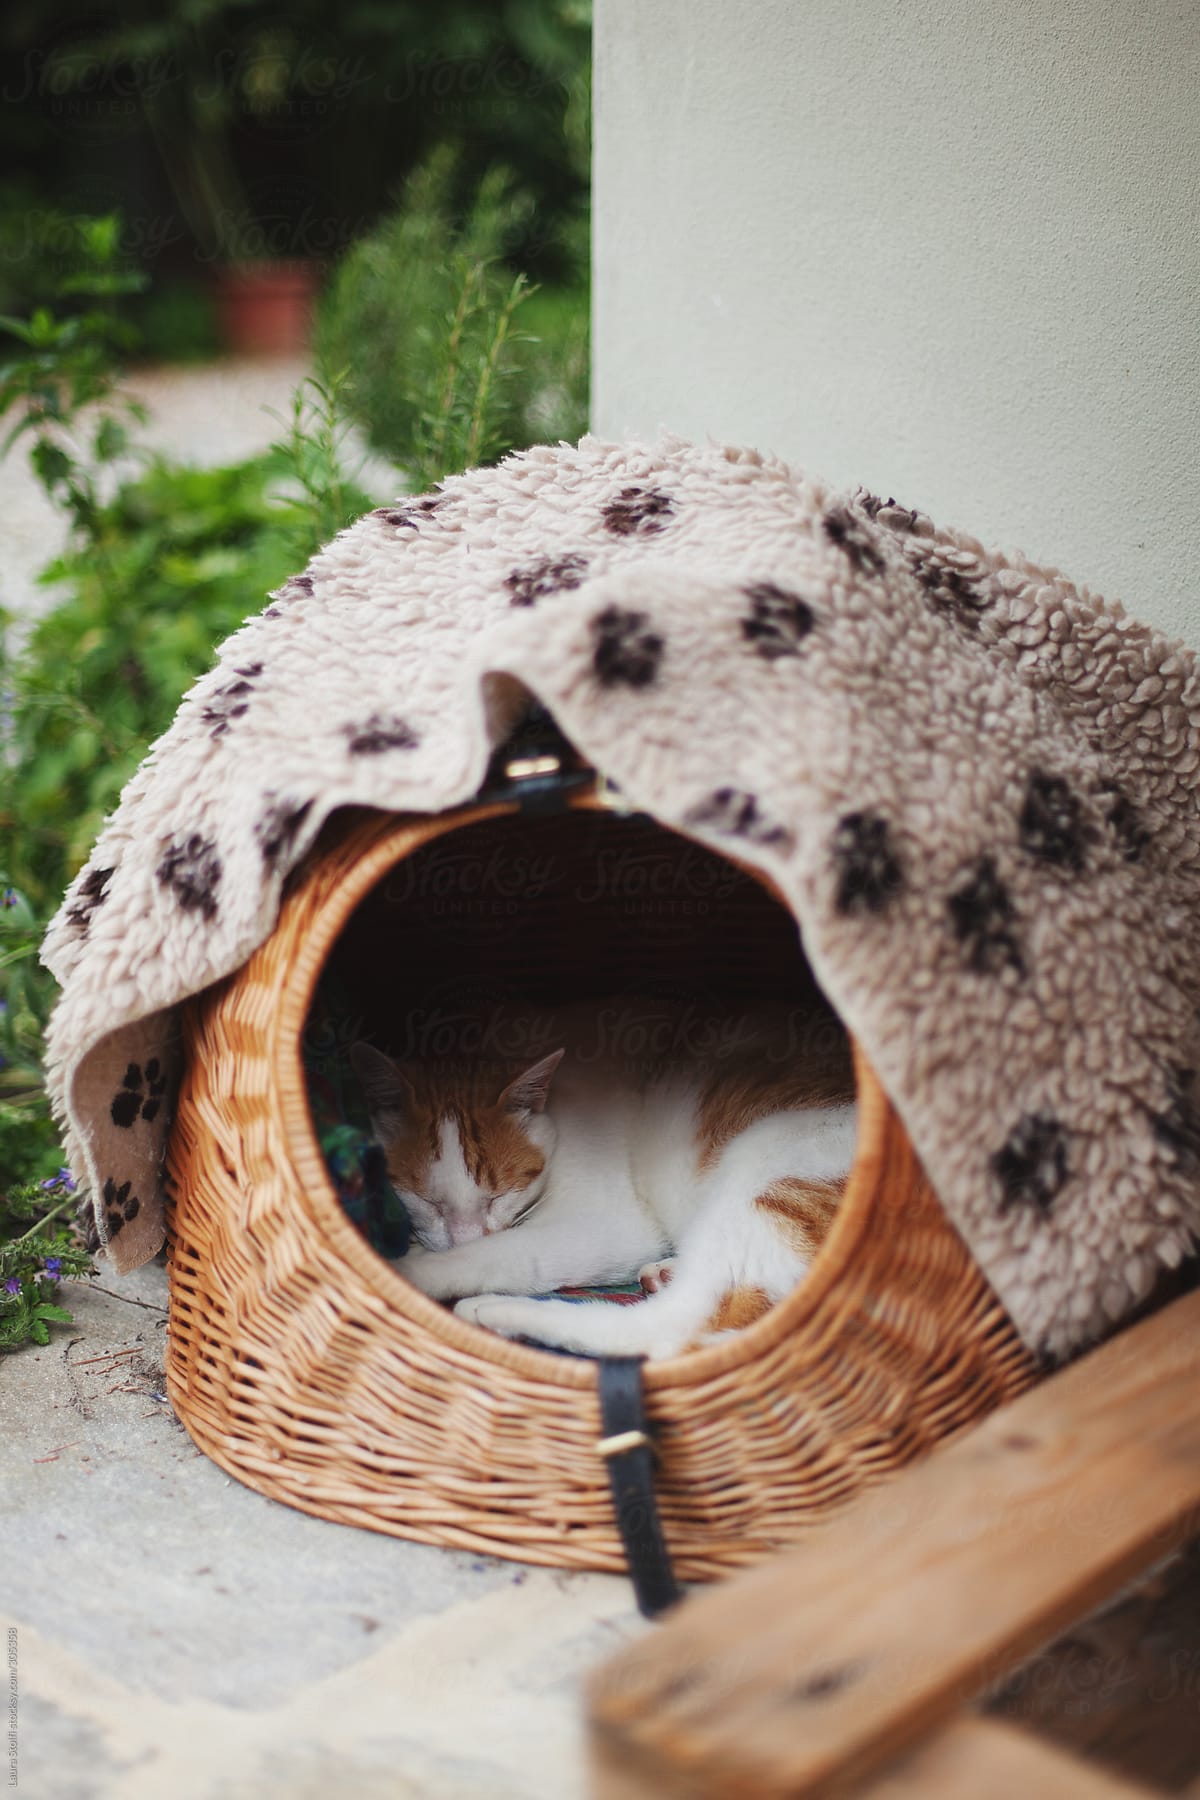 White and ginger cat nestled in wicker basket and sleeping